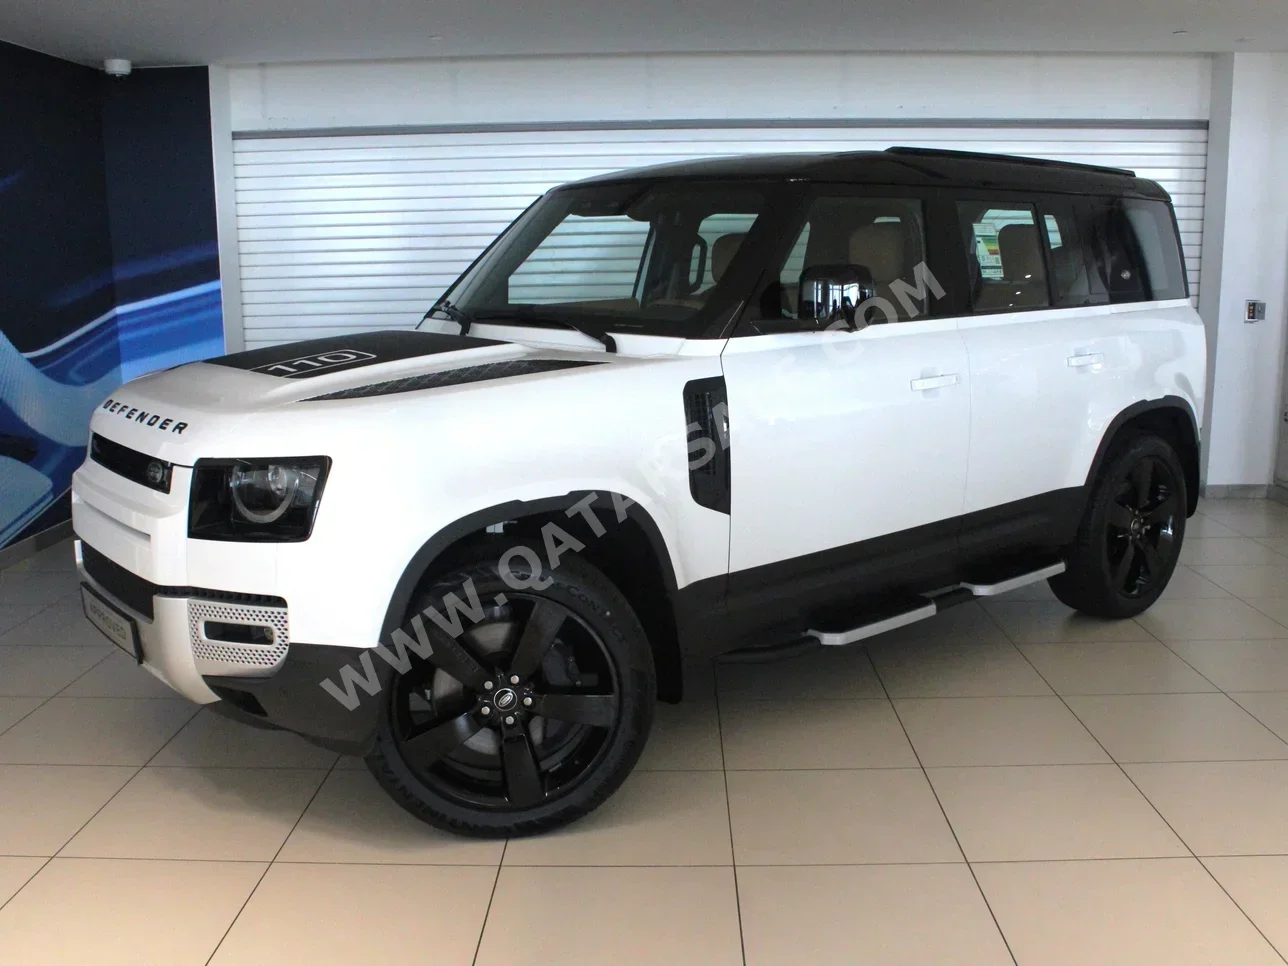 Land Rover  Defender  110 HSE  2024  Automatic  5,500 Km  6 Cylinder  Four Wheel Drive (4WD)  SUV  White  With Warranty